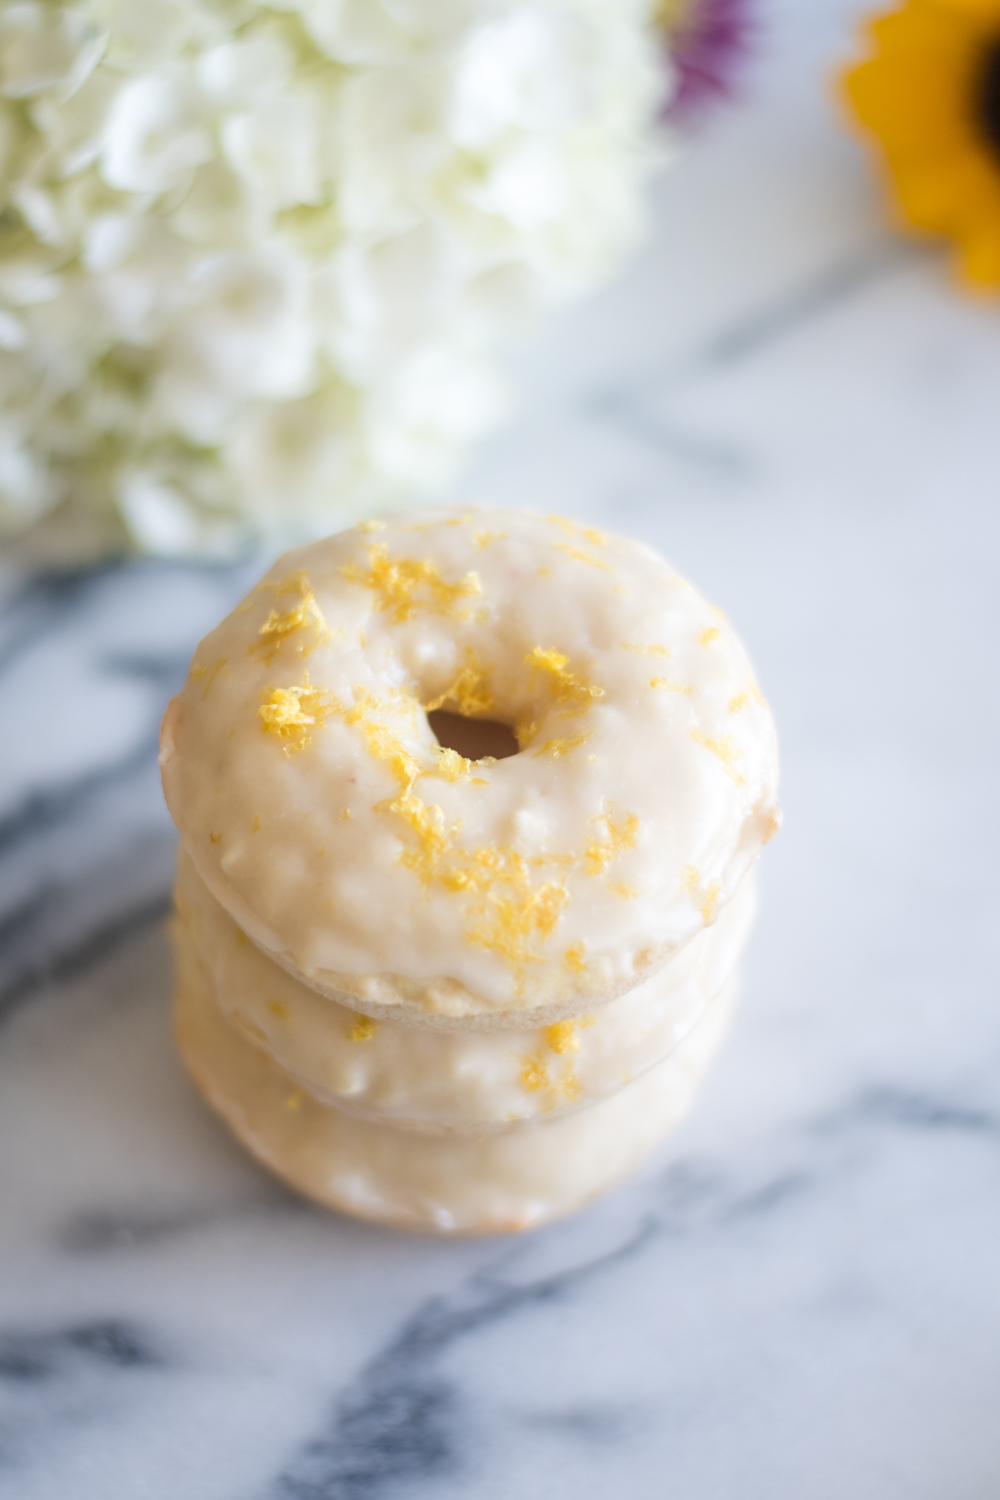 These baked vegan lemon donuts are perfect for spring. They are great for serving for breakfast, an afternoon treat or served at a springtime brunch!